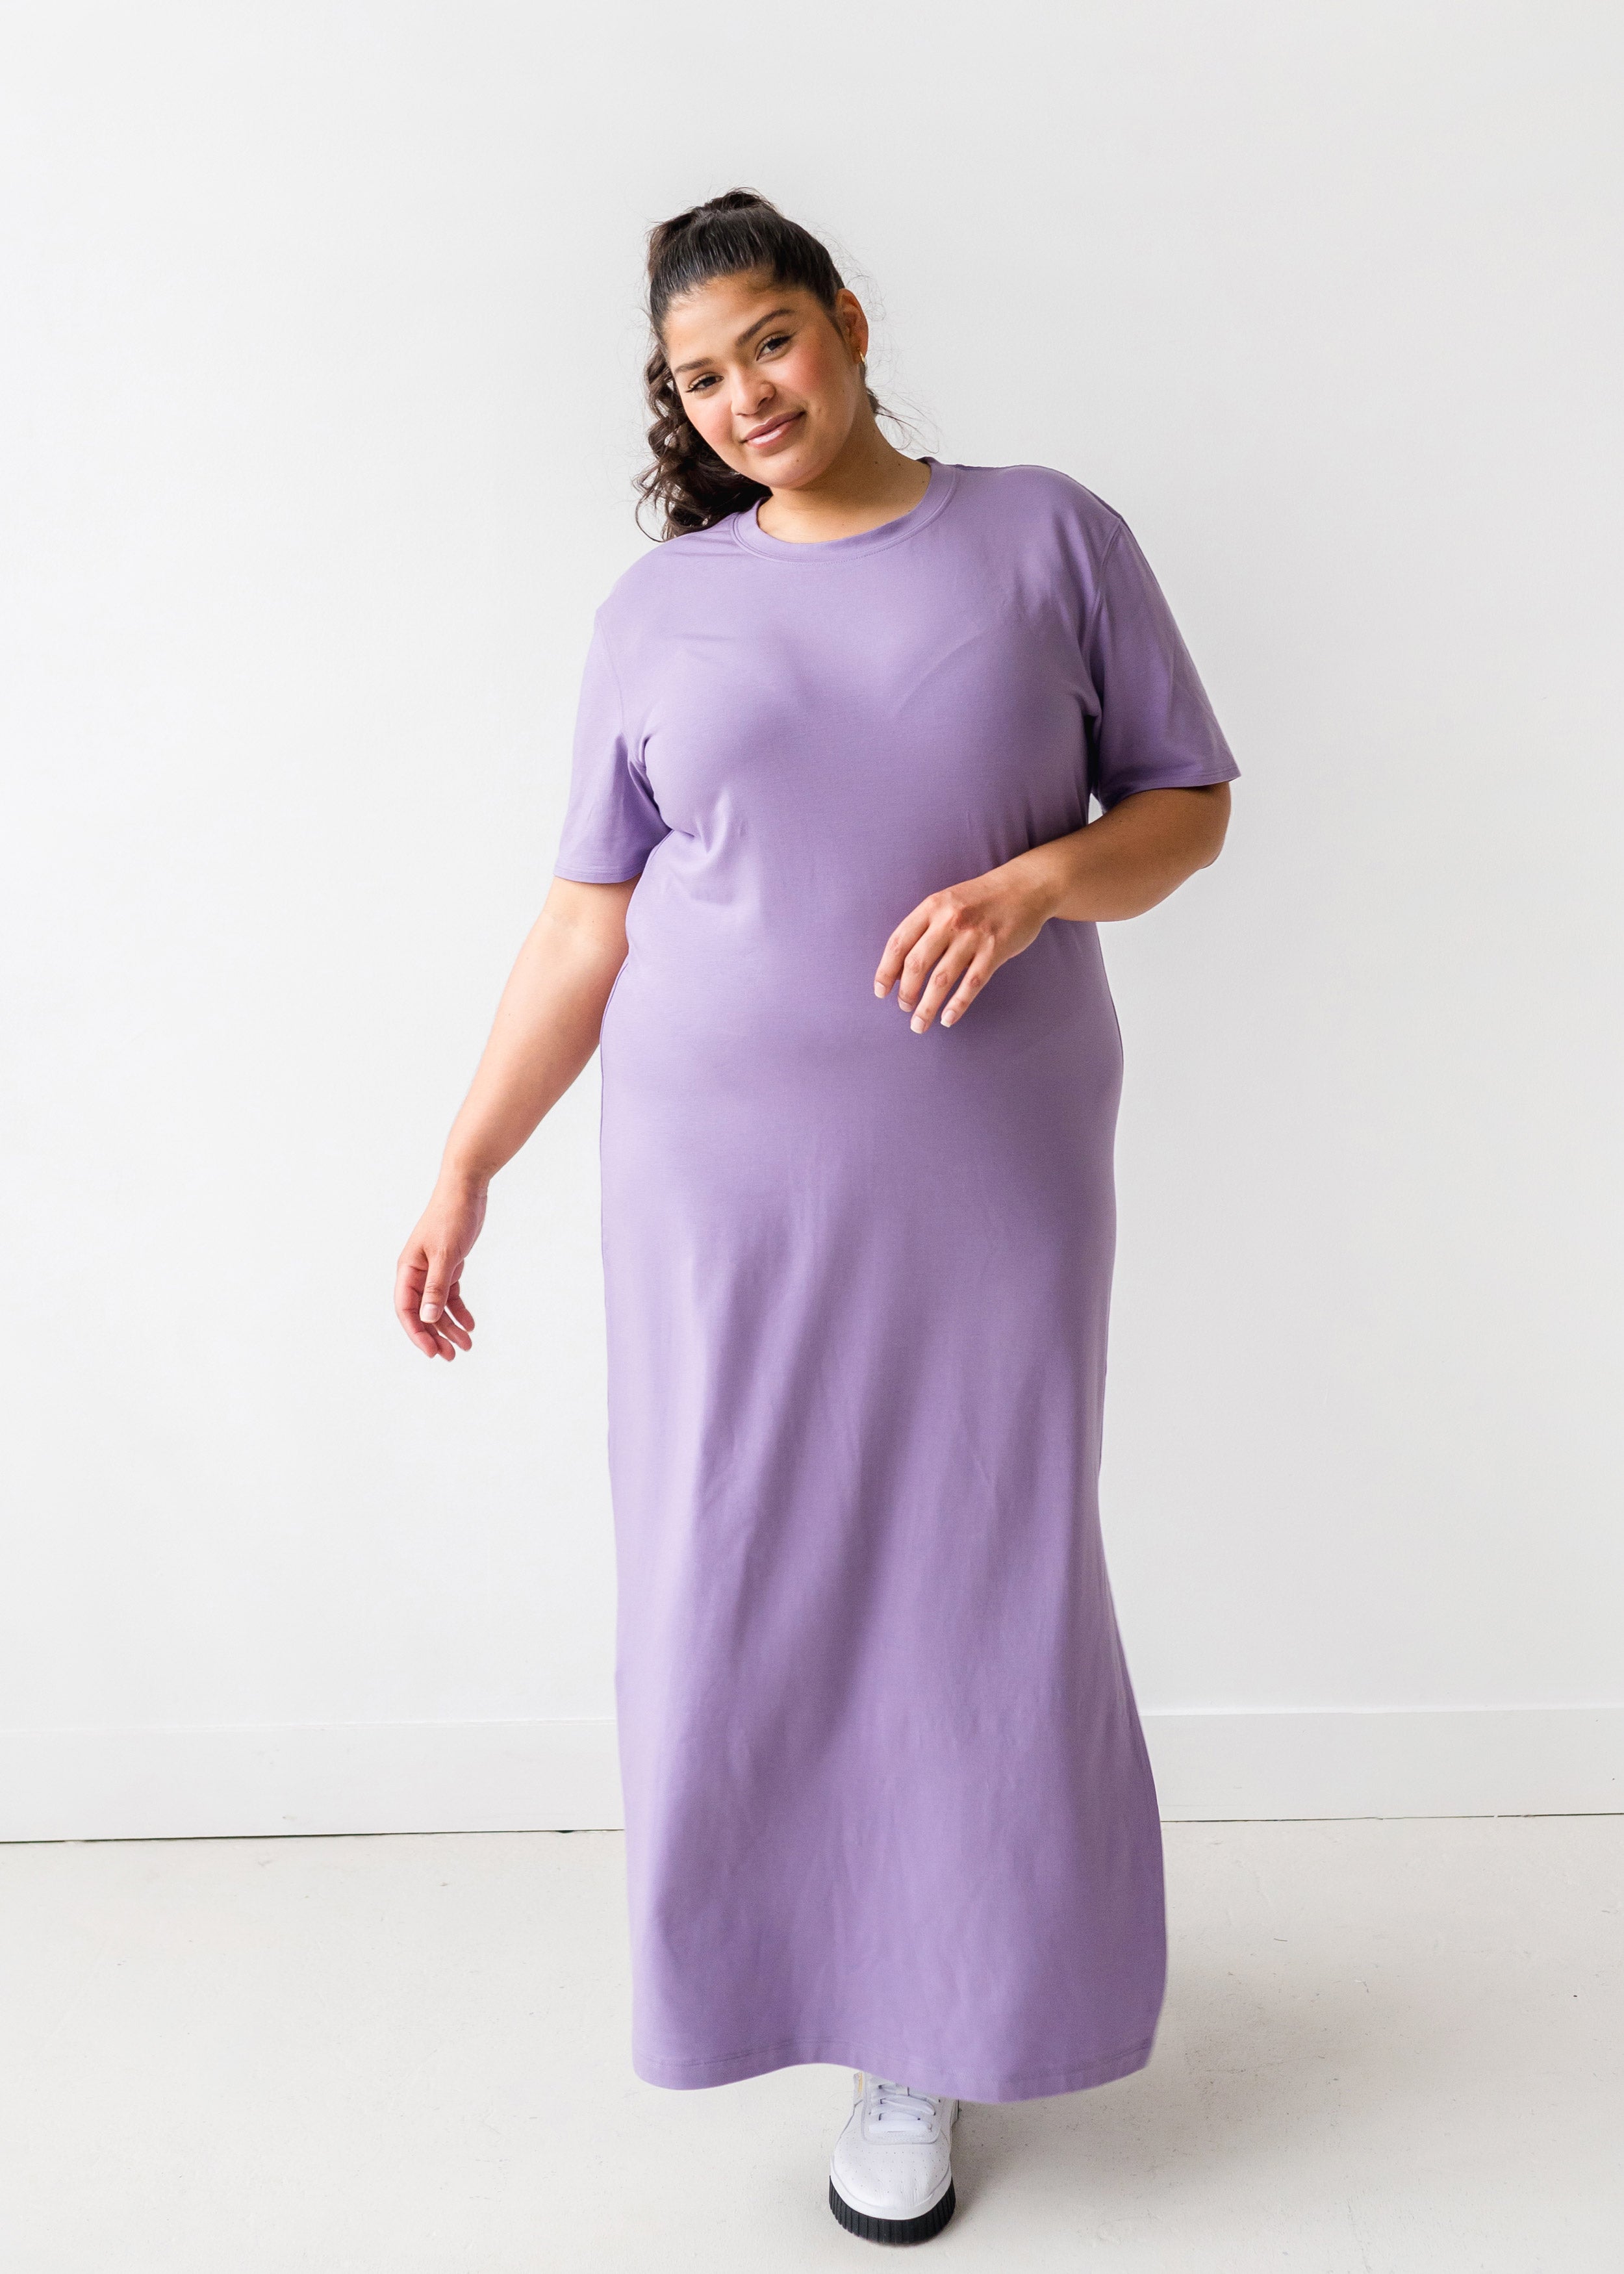 The Maxi T-Shirt Dress in Lavender | FRANC Sustainable Clothing